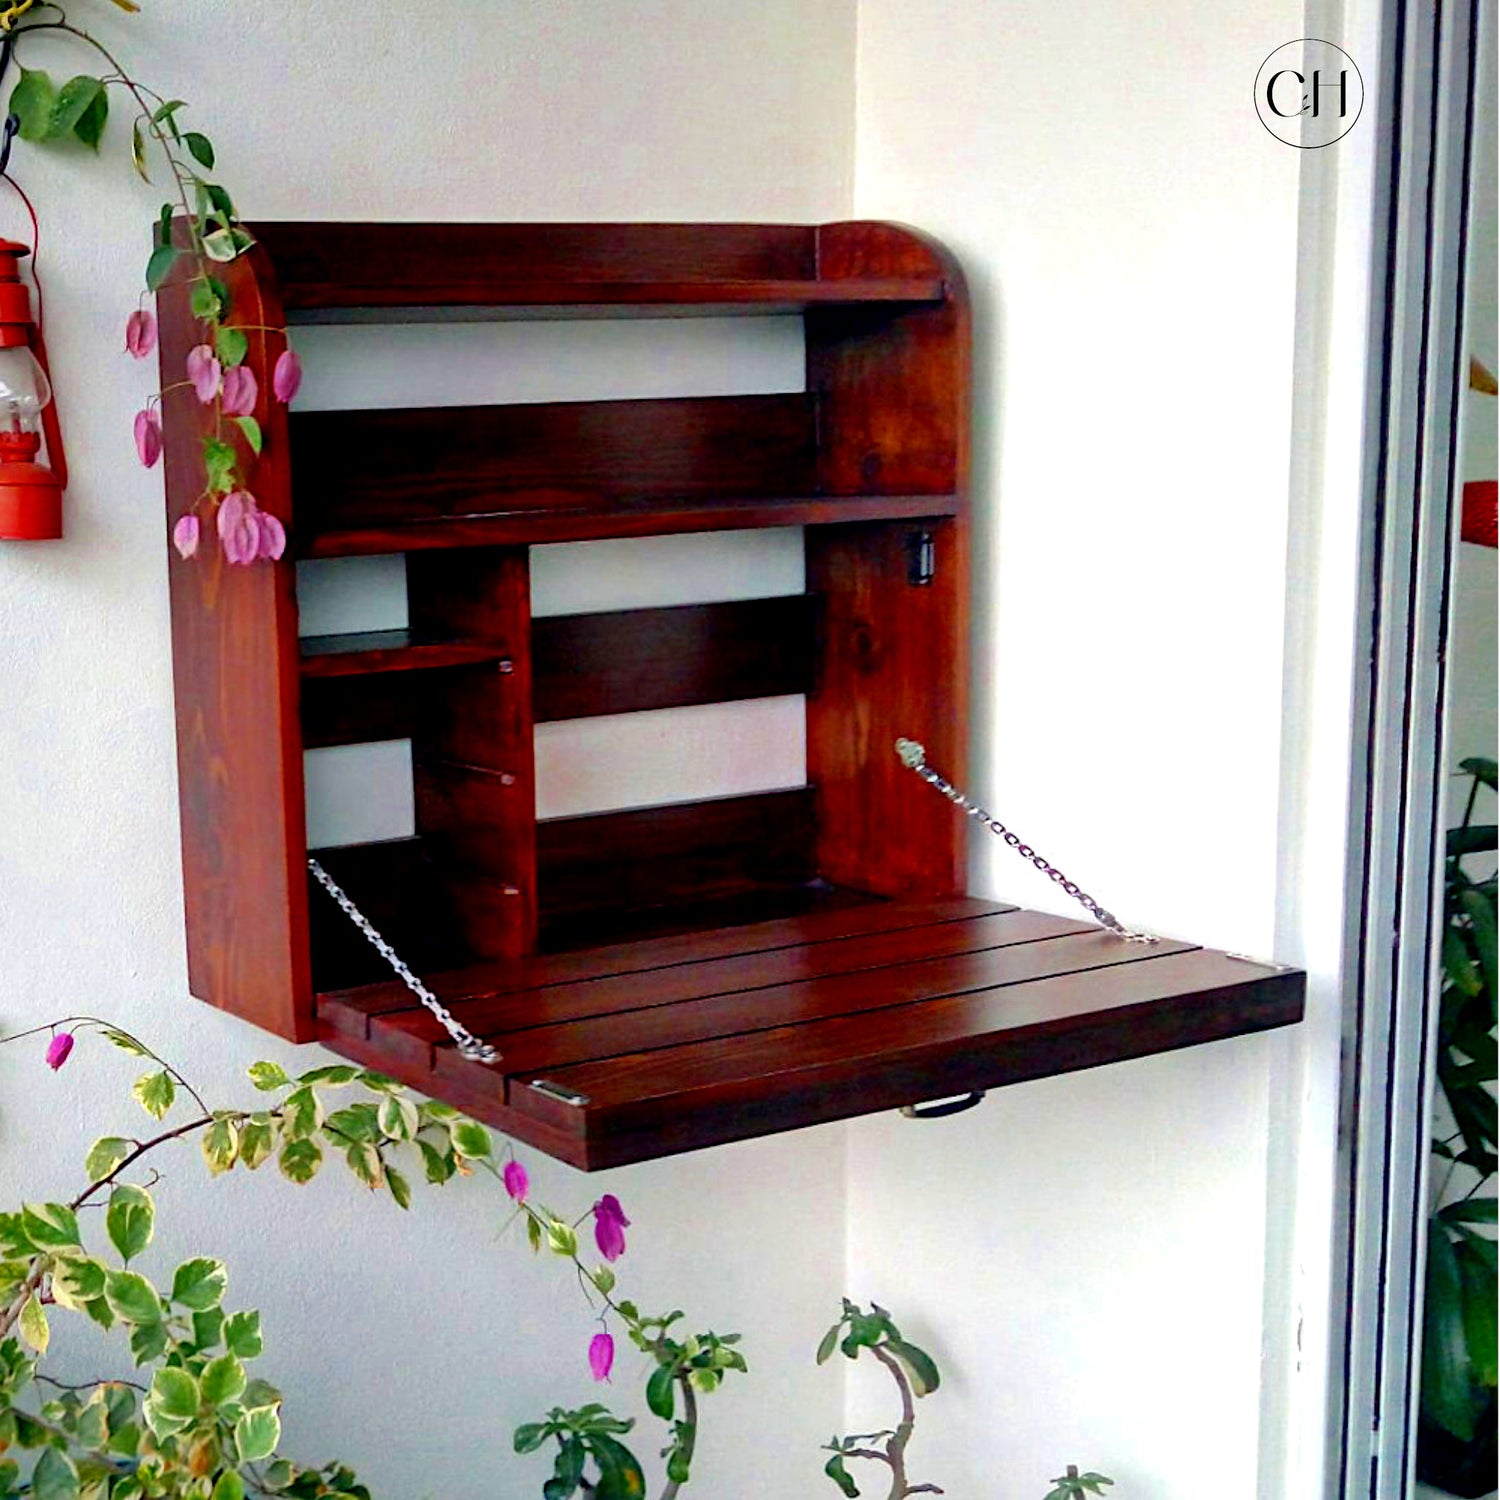 CustHum - Wall-mounted wooden table with shelves inside (open view, bougainvilla in the background)